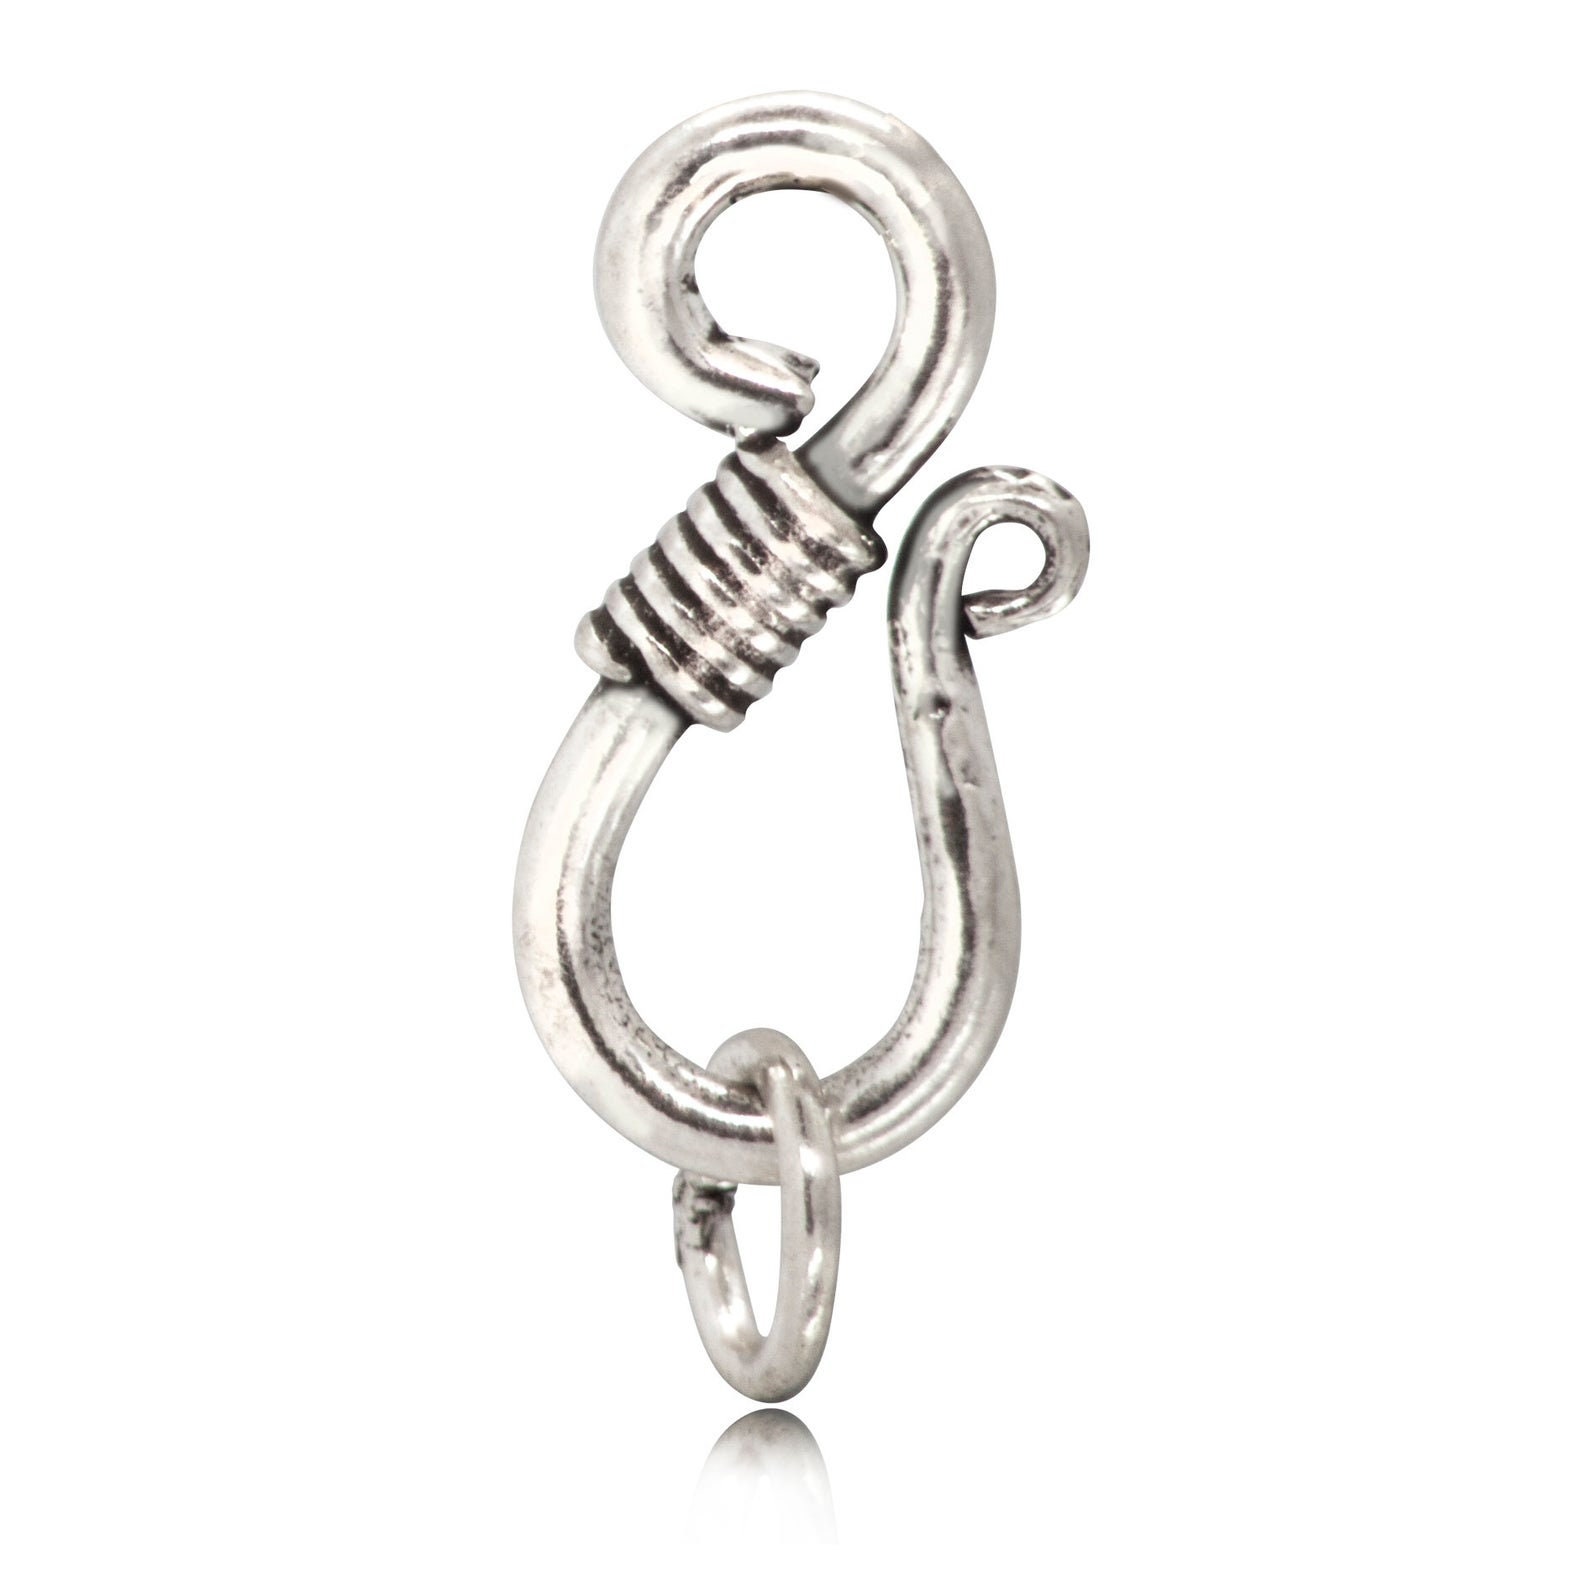 Sterling Silver Hook and Eye Clasp 14mm